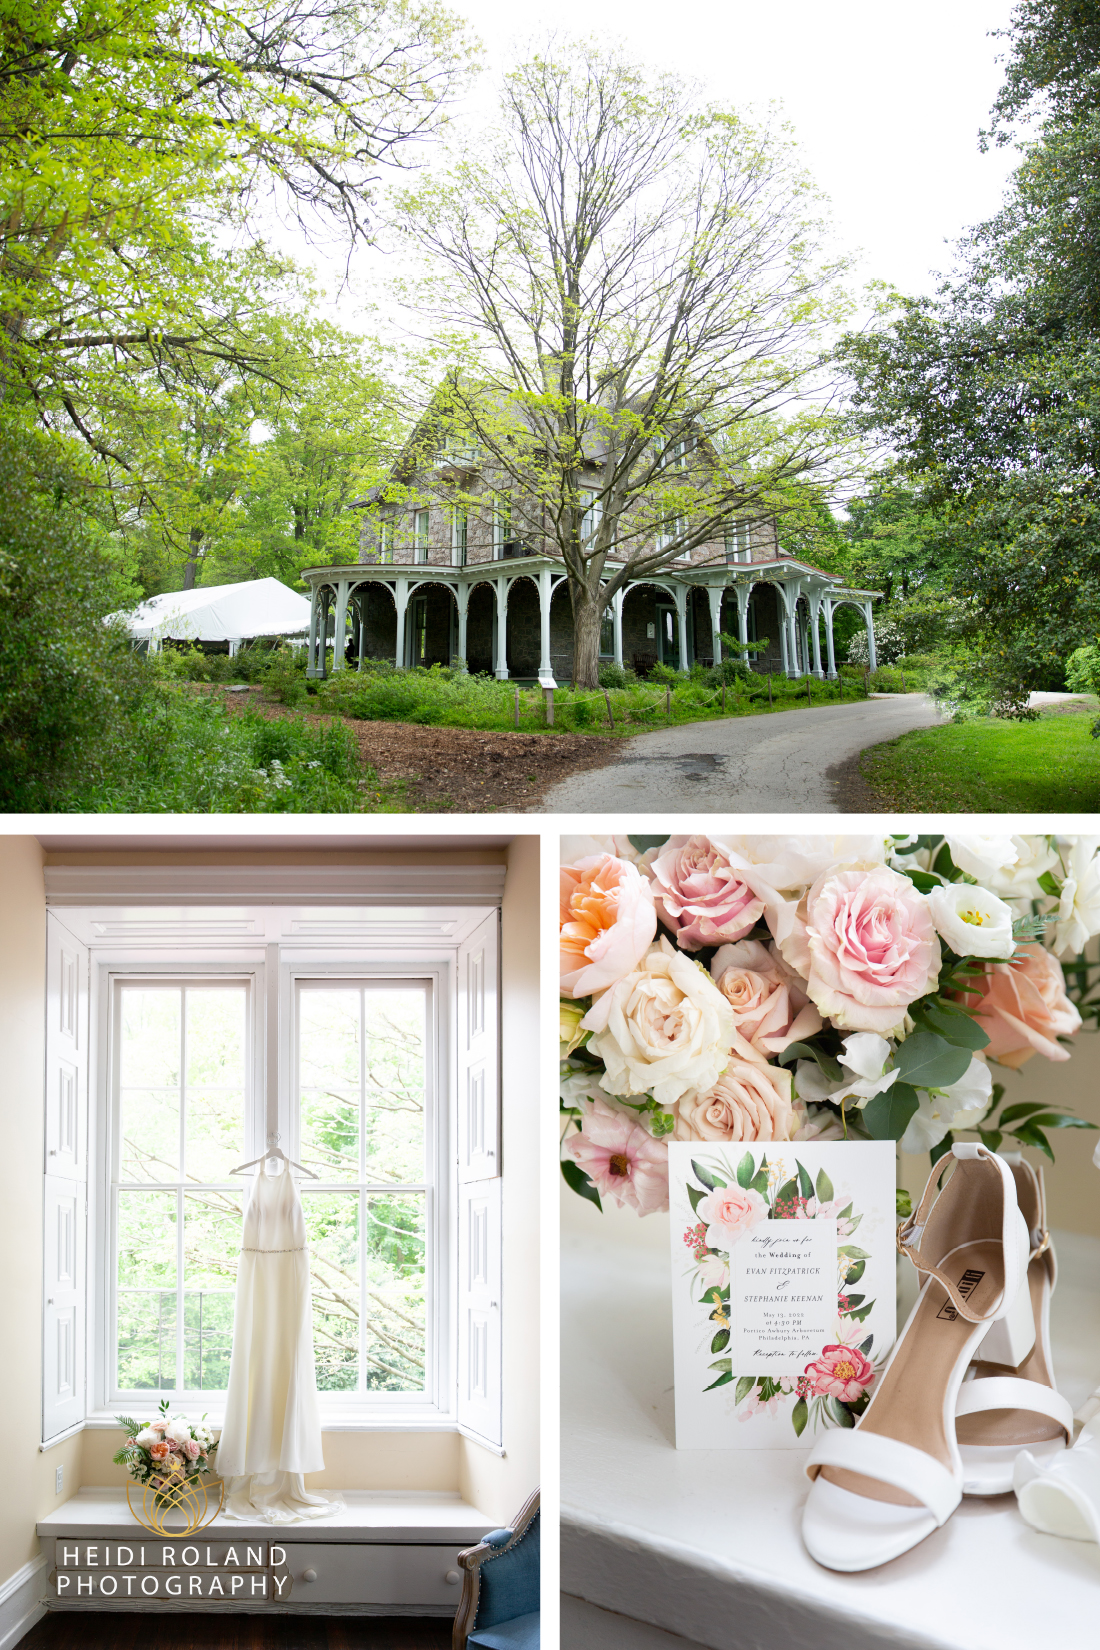 Portico at Awbury Arboretum in philadelphia and wedding dress and flowers by the windows inside